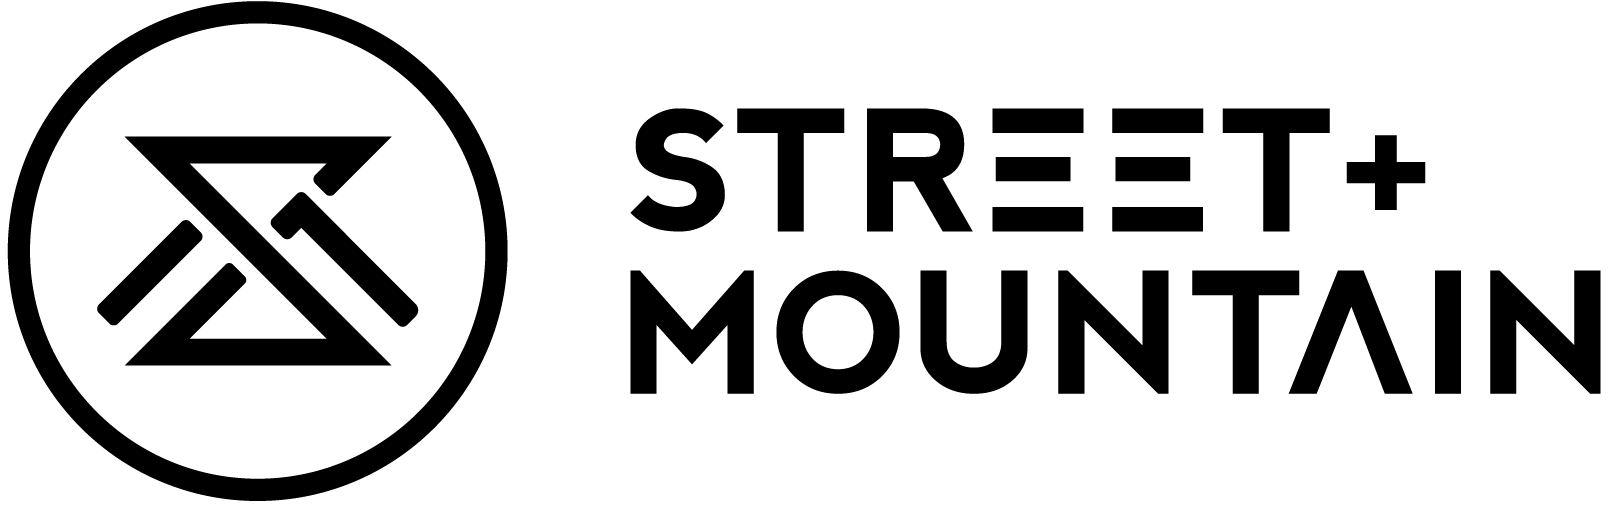 Street Mountain Logo - Street and Mountain - Exist Different - Bike Board Hike Culture